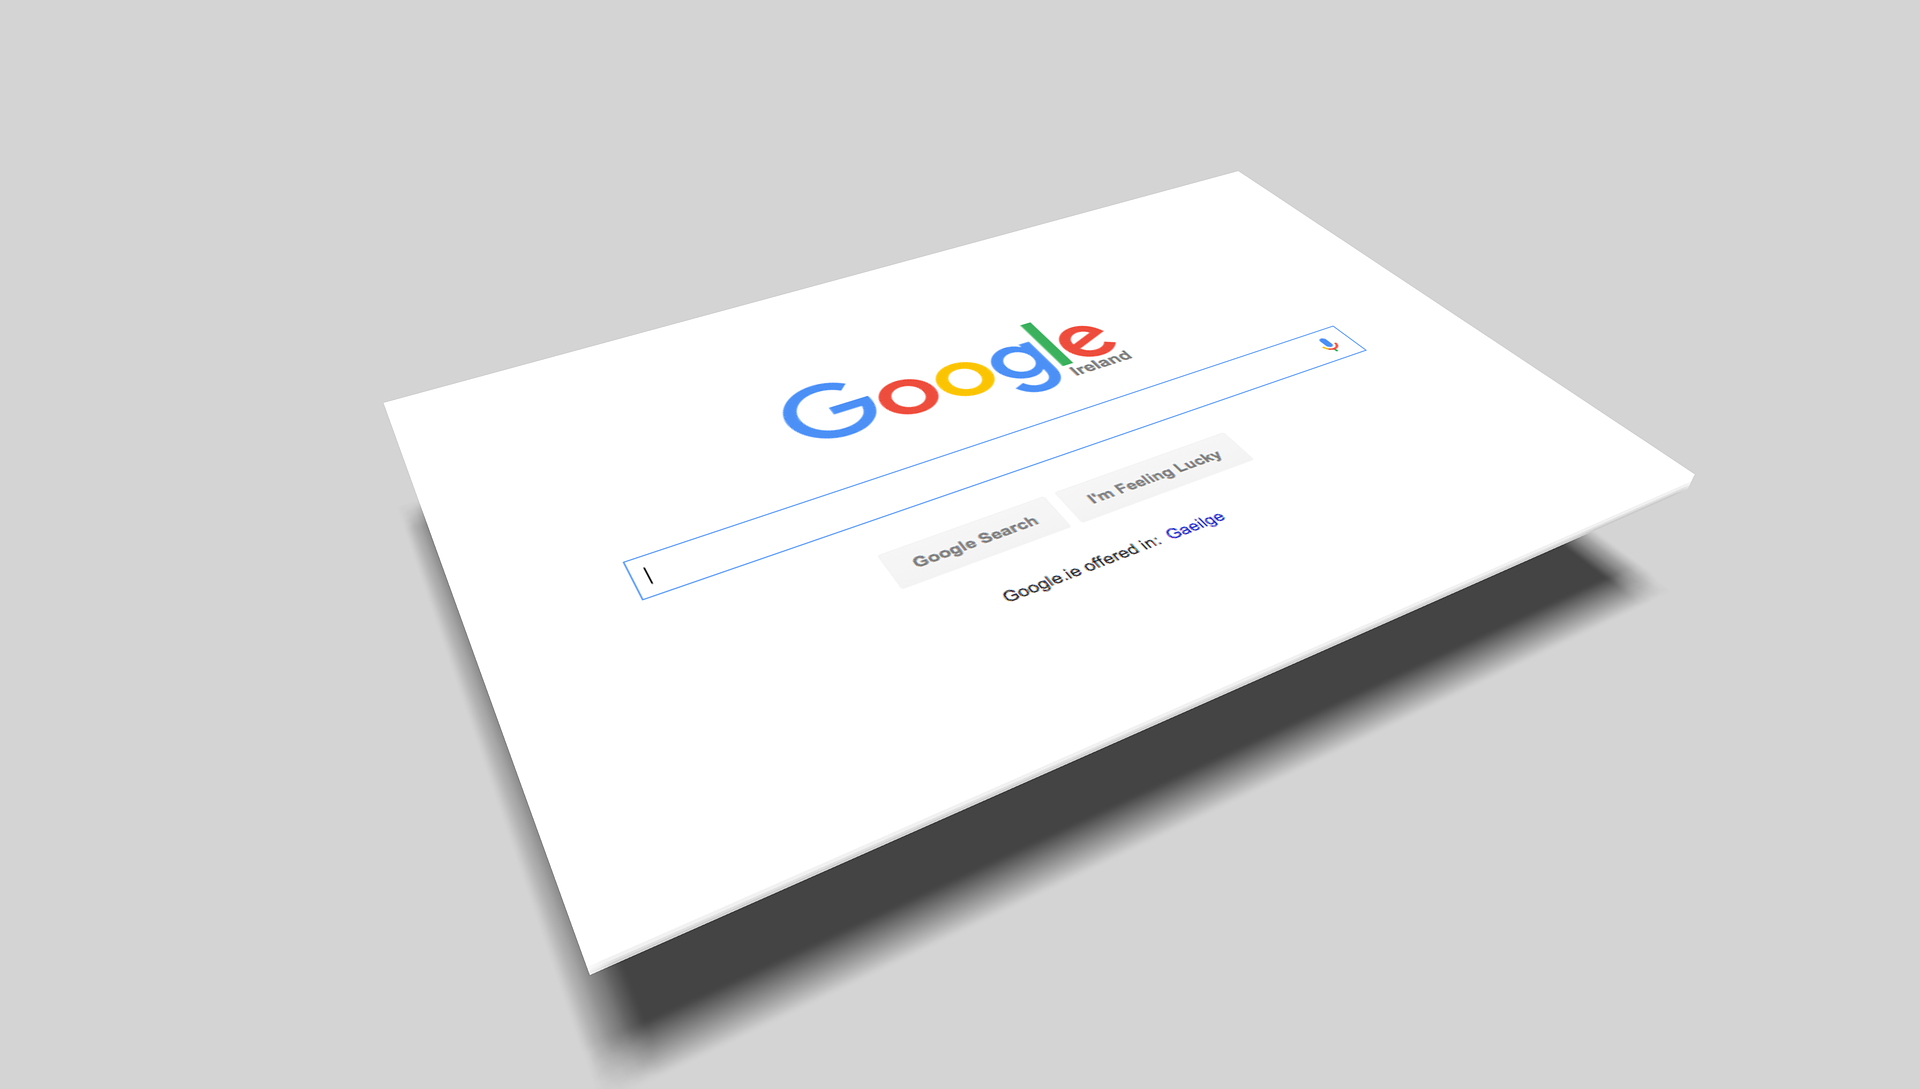 What Is the Latest Google SEO Update About?